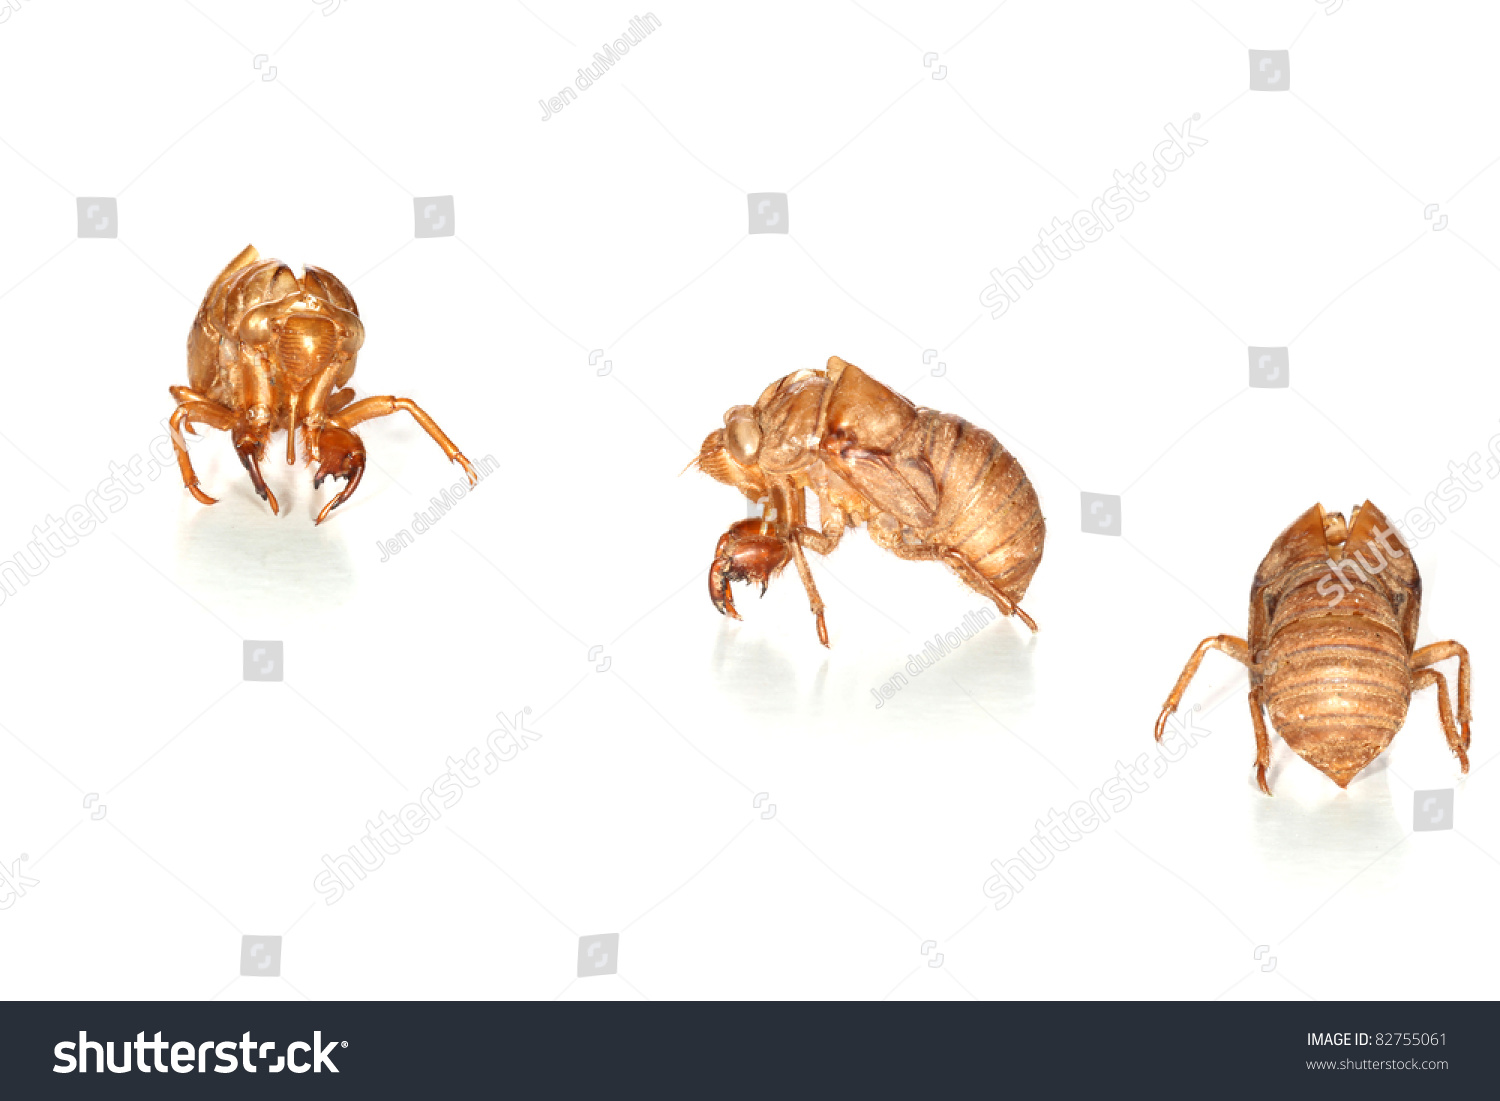 3 Cicada Shells Front, Side And Back Views Stock Photo ... - 1500 x 1101 jpeg 235kB